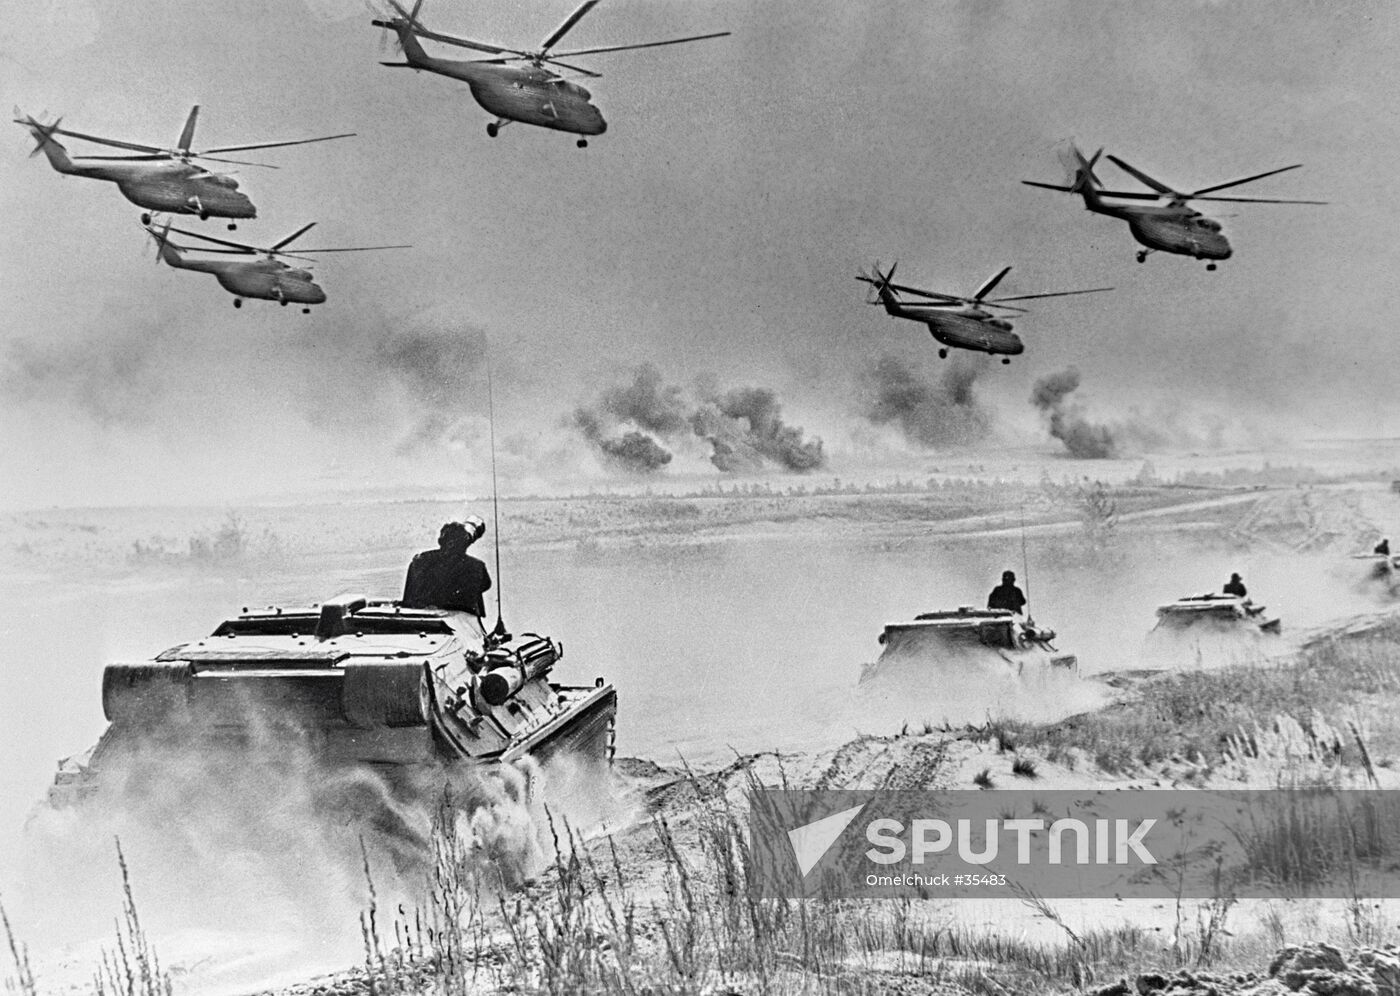 SOVIET ARMY TACTICAL TRAINING EXERCISE